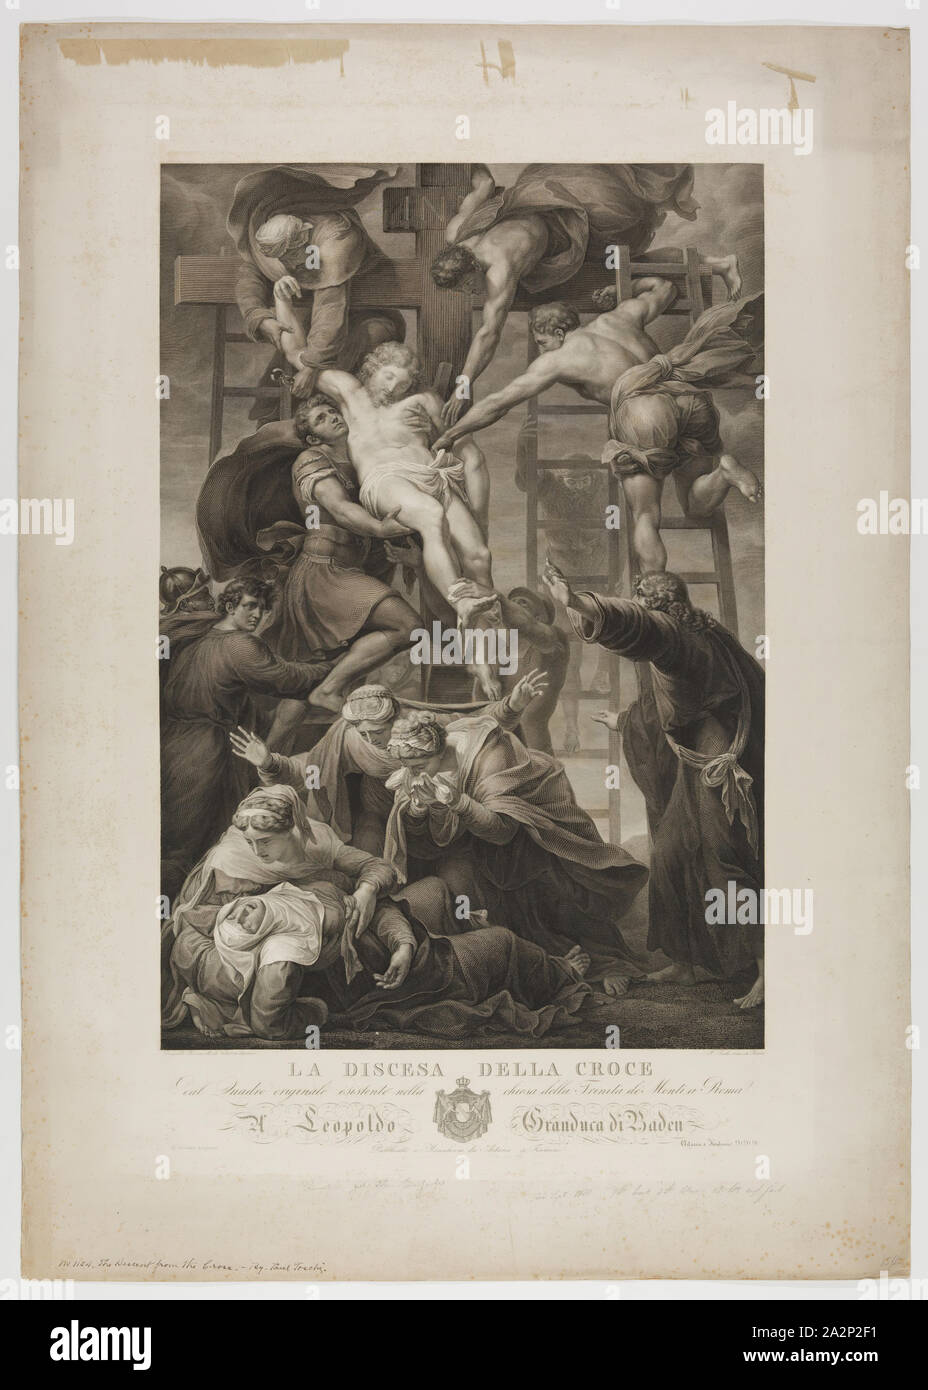 Paolo Toschi, Italian, 1788-1854, after Daniele Ricciarelli, Italian, 1509-1566, Descent from the Cross, 1843, Engraving printed in black on wove paper, image: 28 x 19 1/8 in Stock Photo